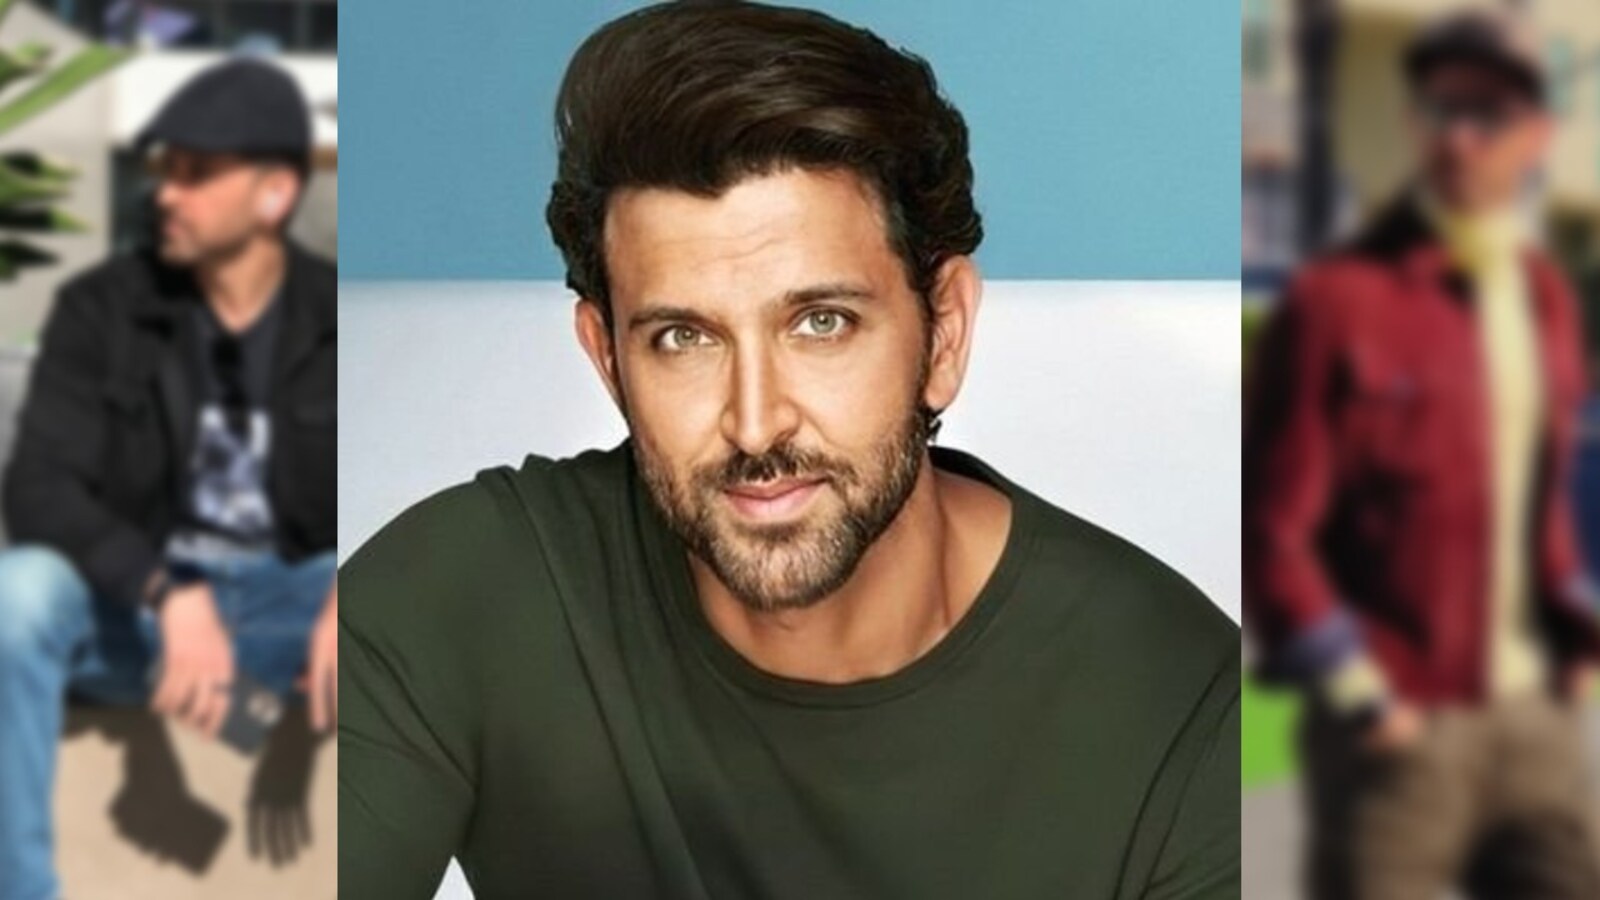 https://images.moneycontrol.com/static-mcnews/2020/07/HRITHIK-ROSHAN.jpg?impolicy=website&width=1600&height=900